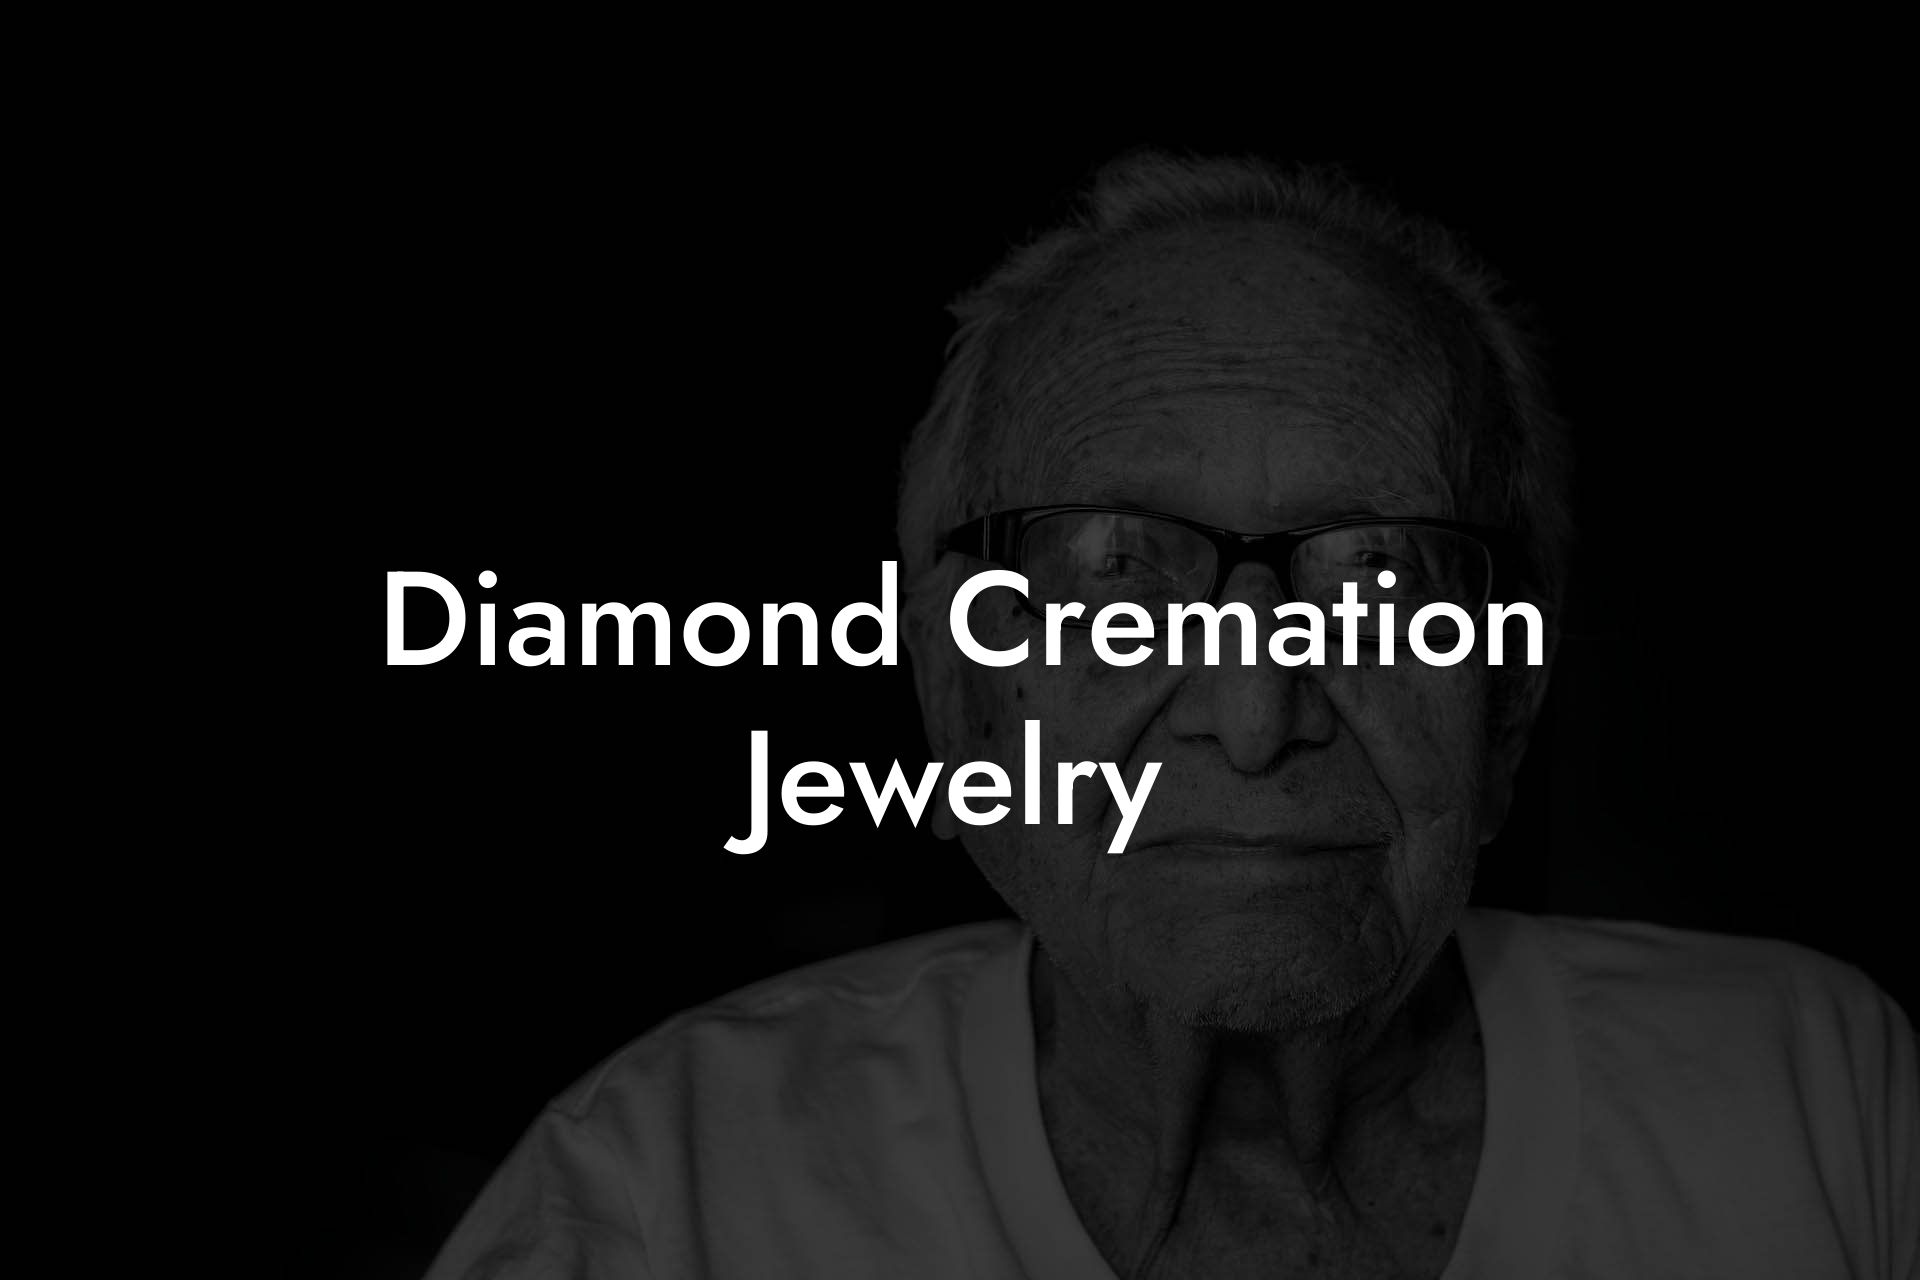 Diamond Cremation Jewelry - Eulogy Assistant